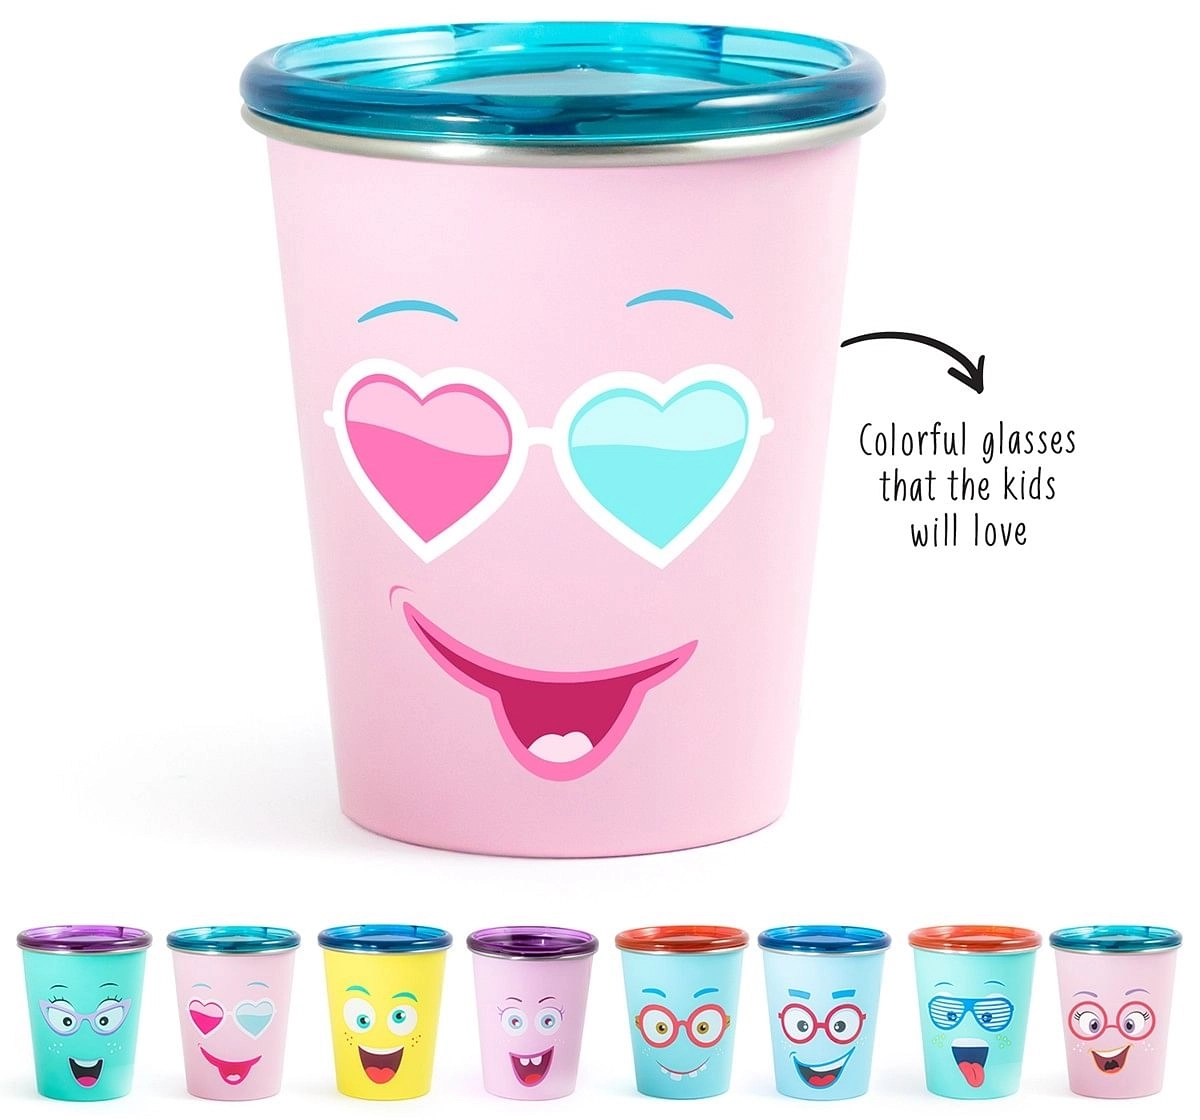 Rabitat Spill Free Stainless Steel Cup, Pink, Diva, 5Y+